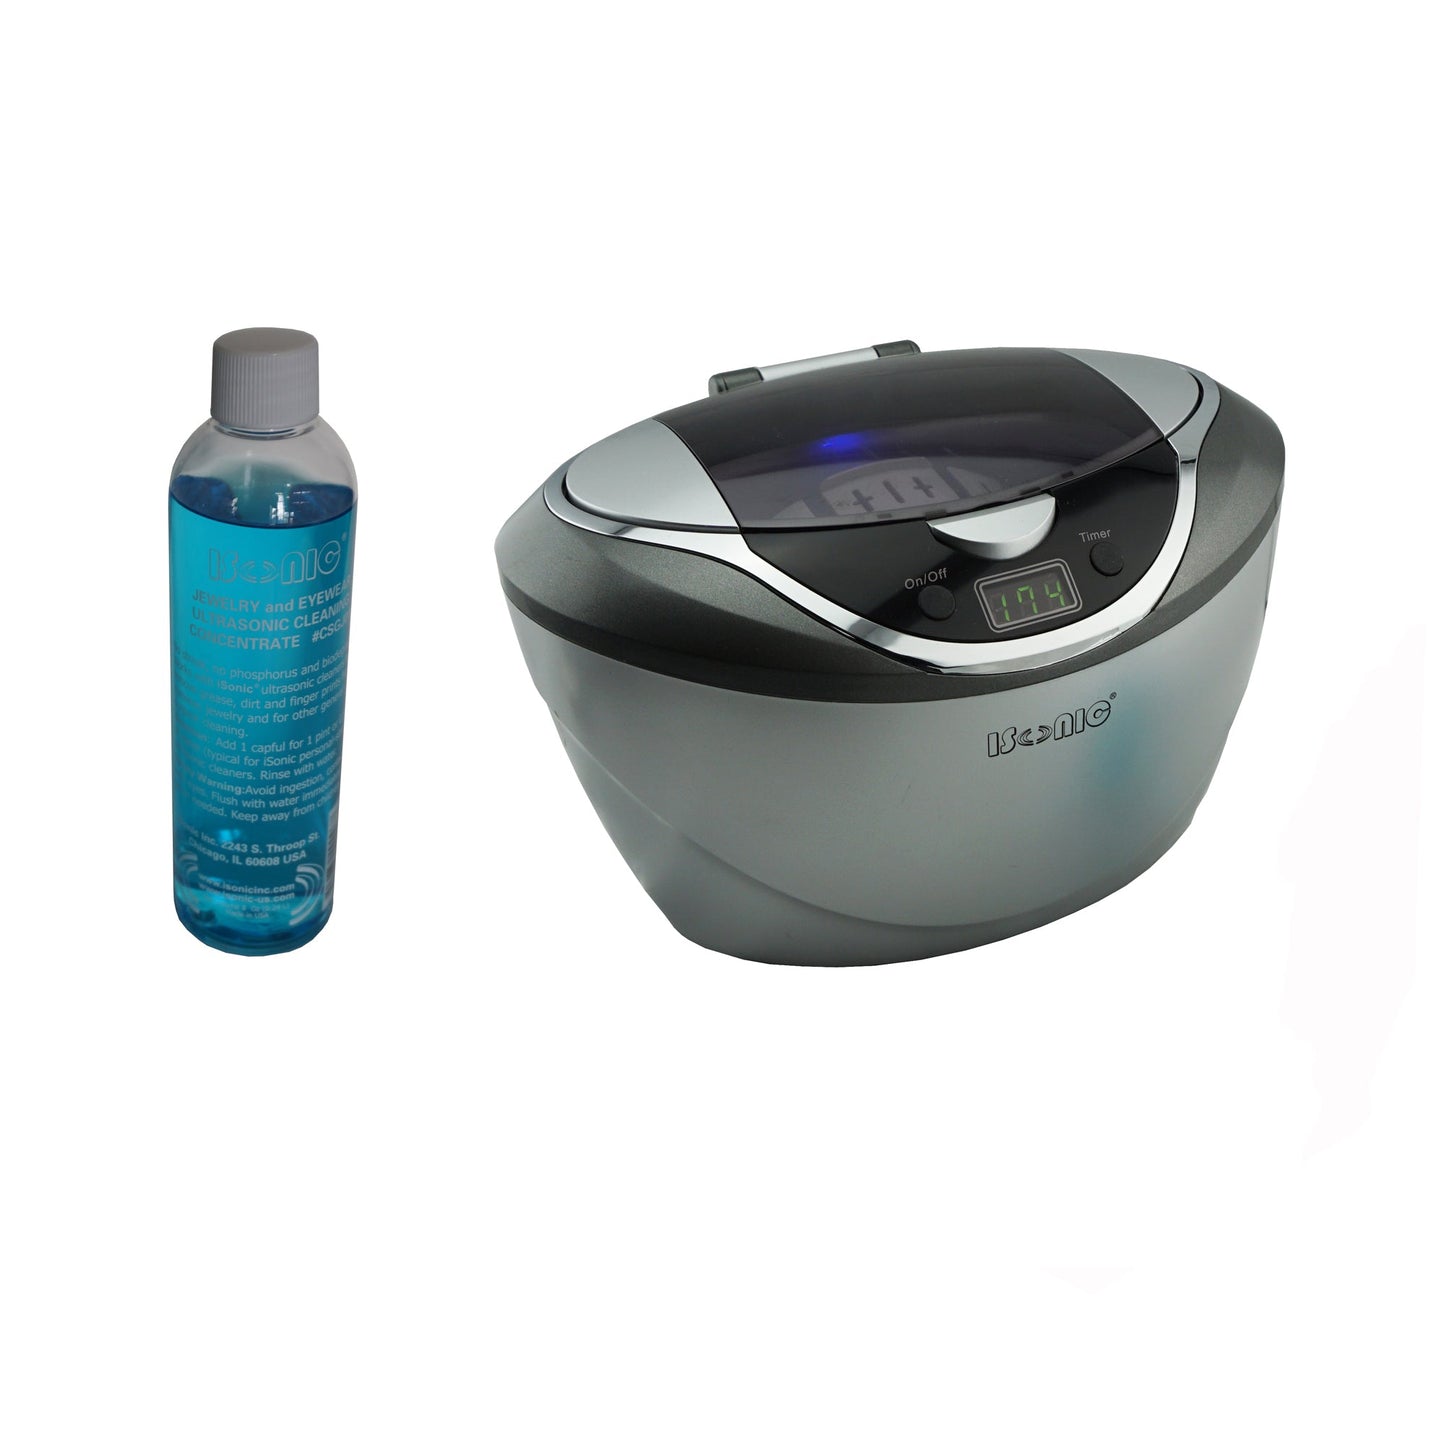 iSonic Ultrasonic Jewelry Cleaner D2840 with Cleaning Solution Concentrate CSGJ01, 110V